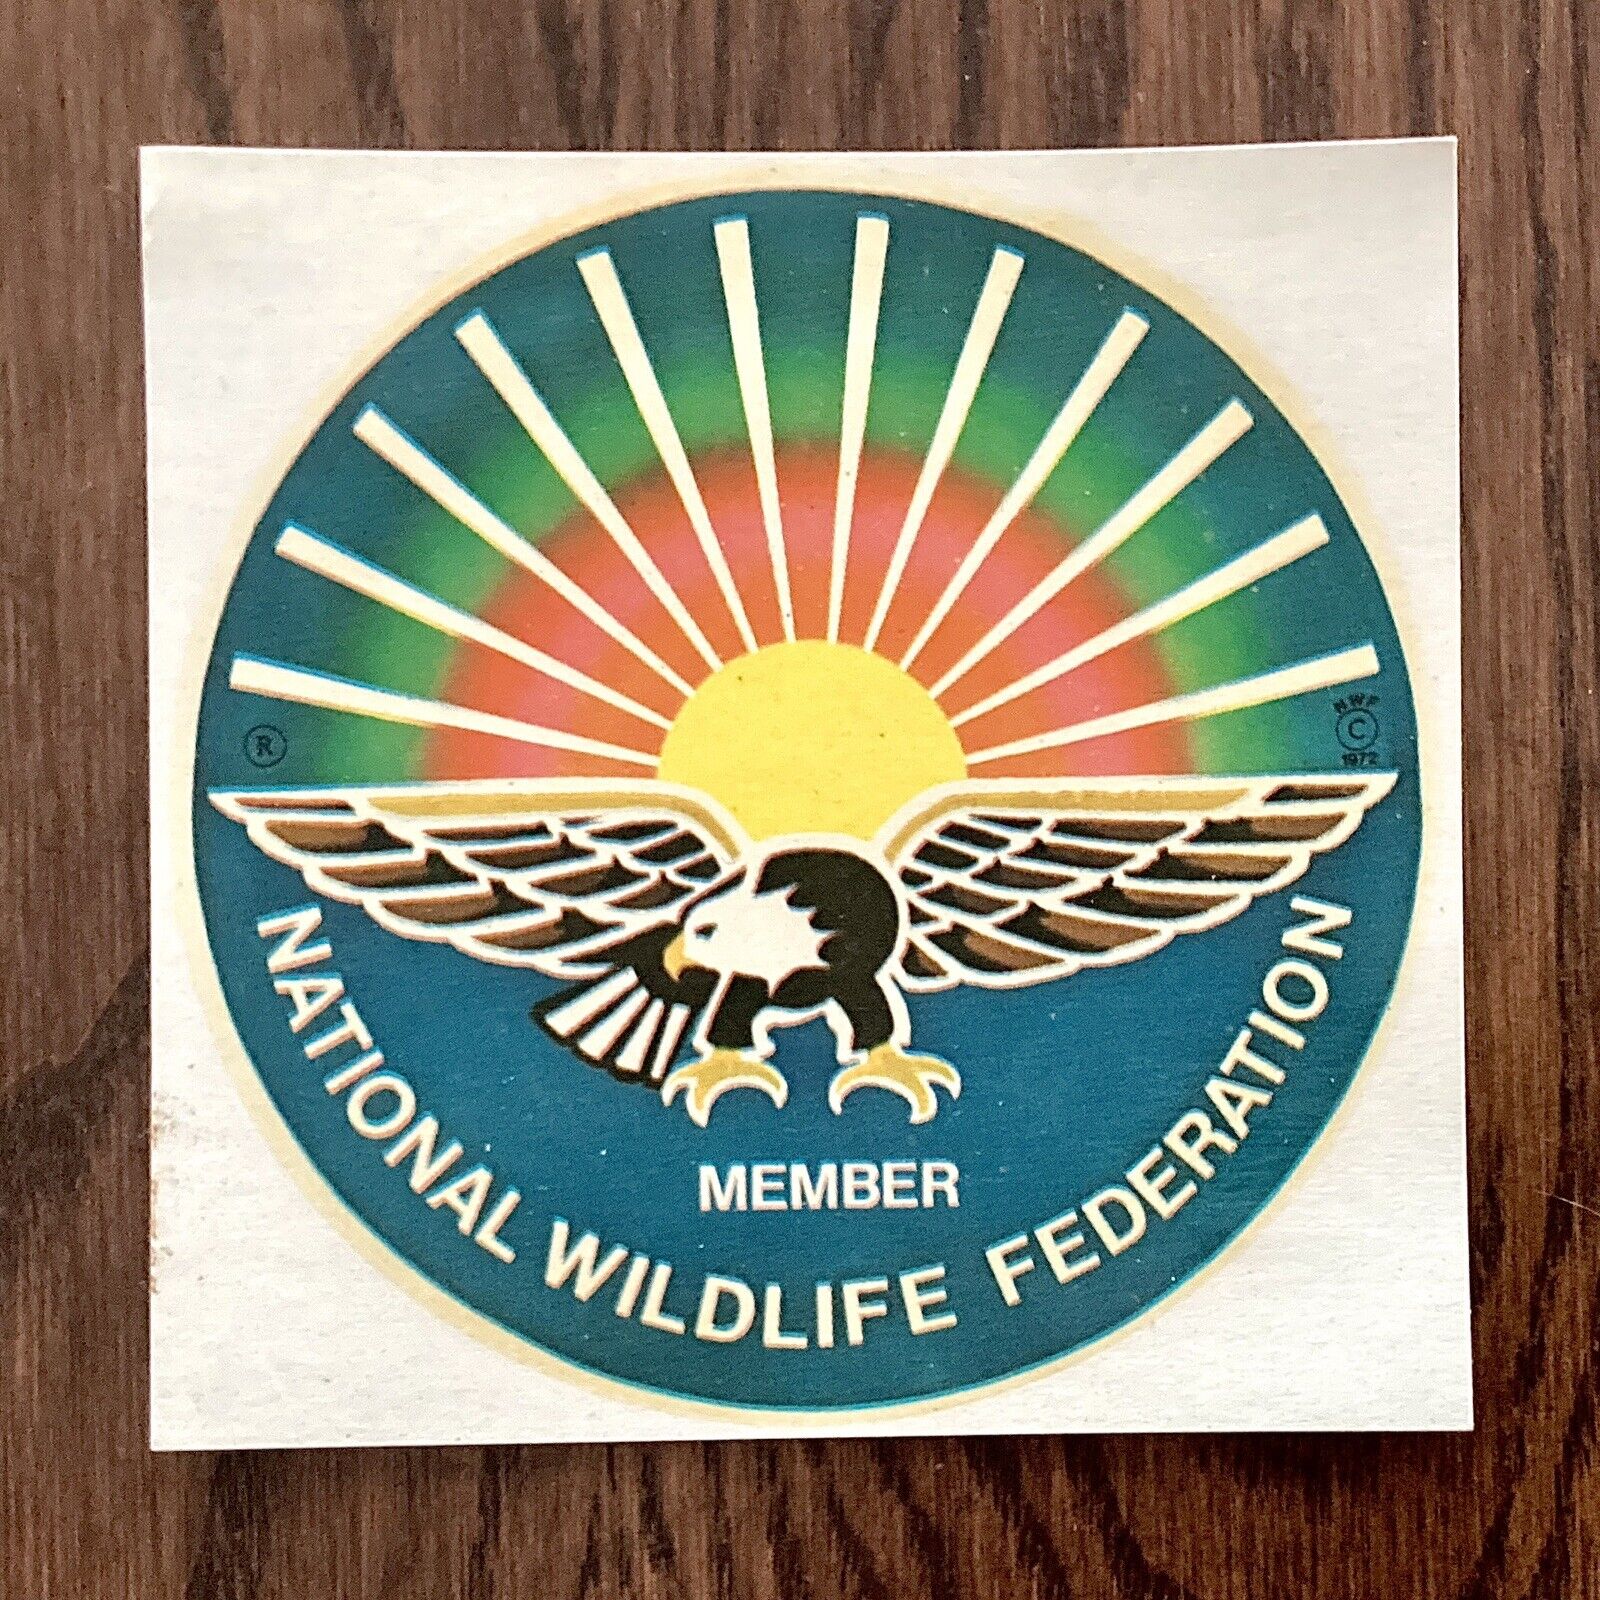 Vintage National Wildlife Federation Member Sticker  Decal - 3.5”, New, Bright